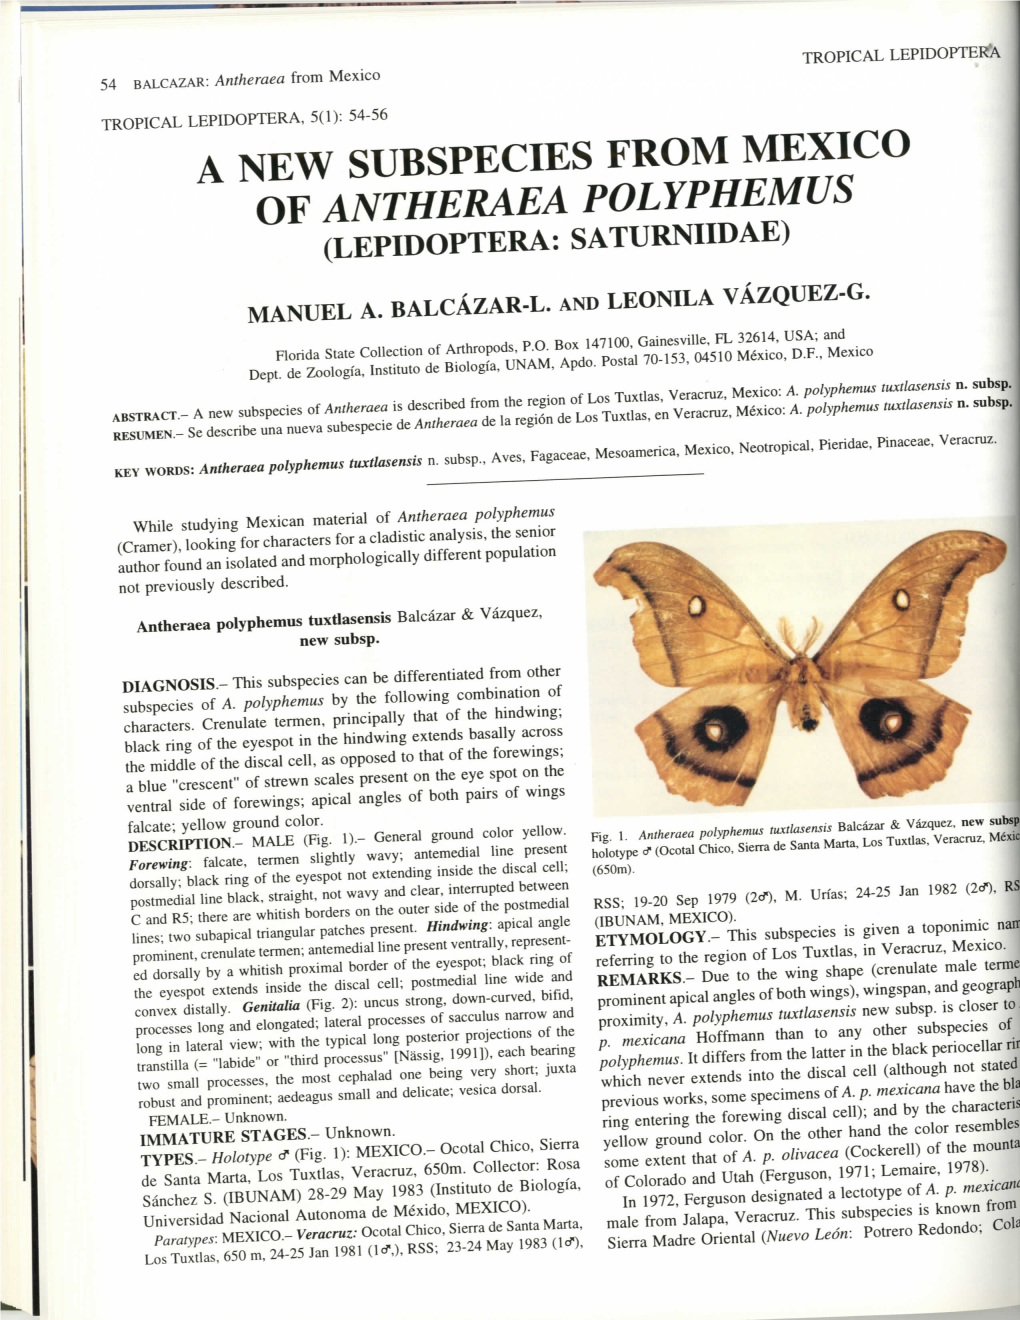 A New Subspecies from Mexico of Antheraea Polyphemus (Lepidoptera: Saturniidae)